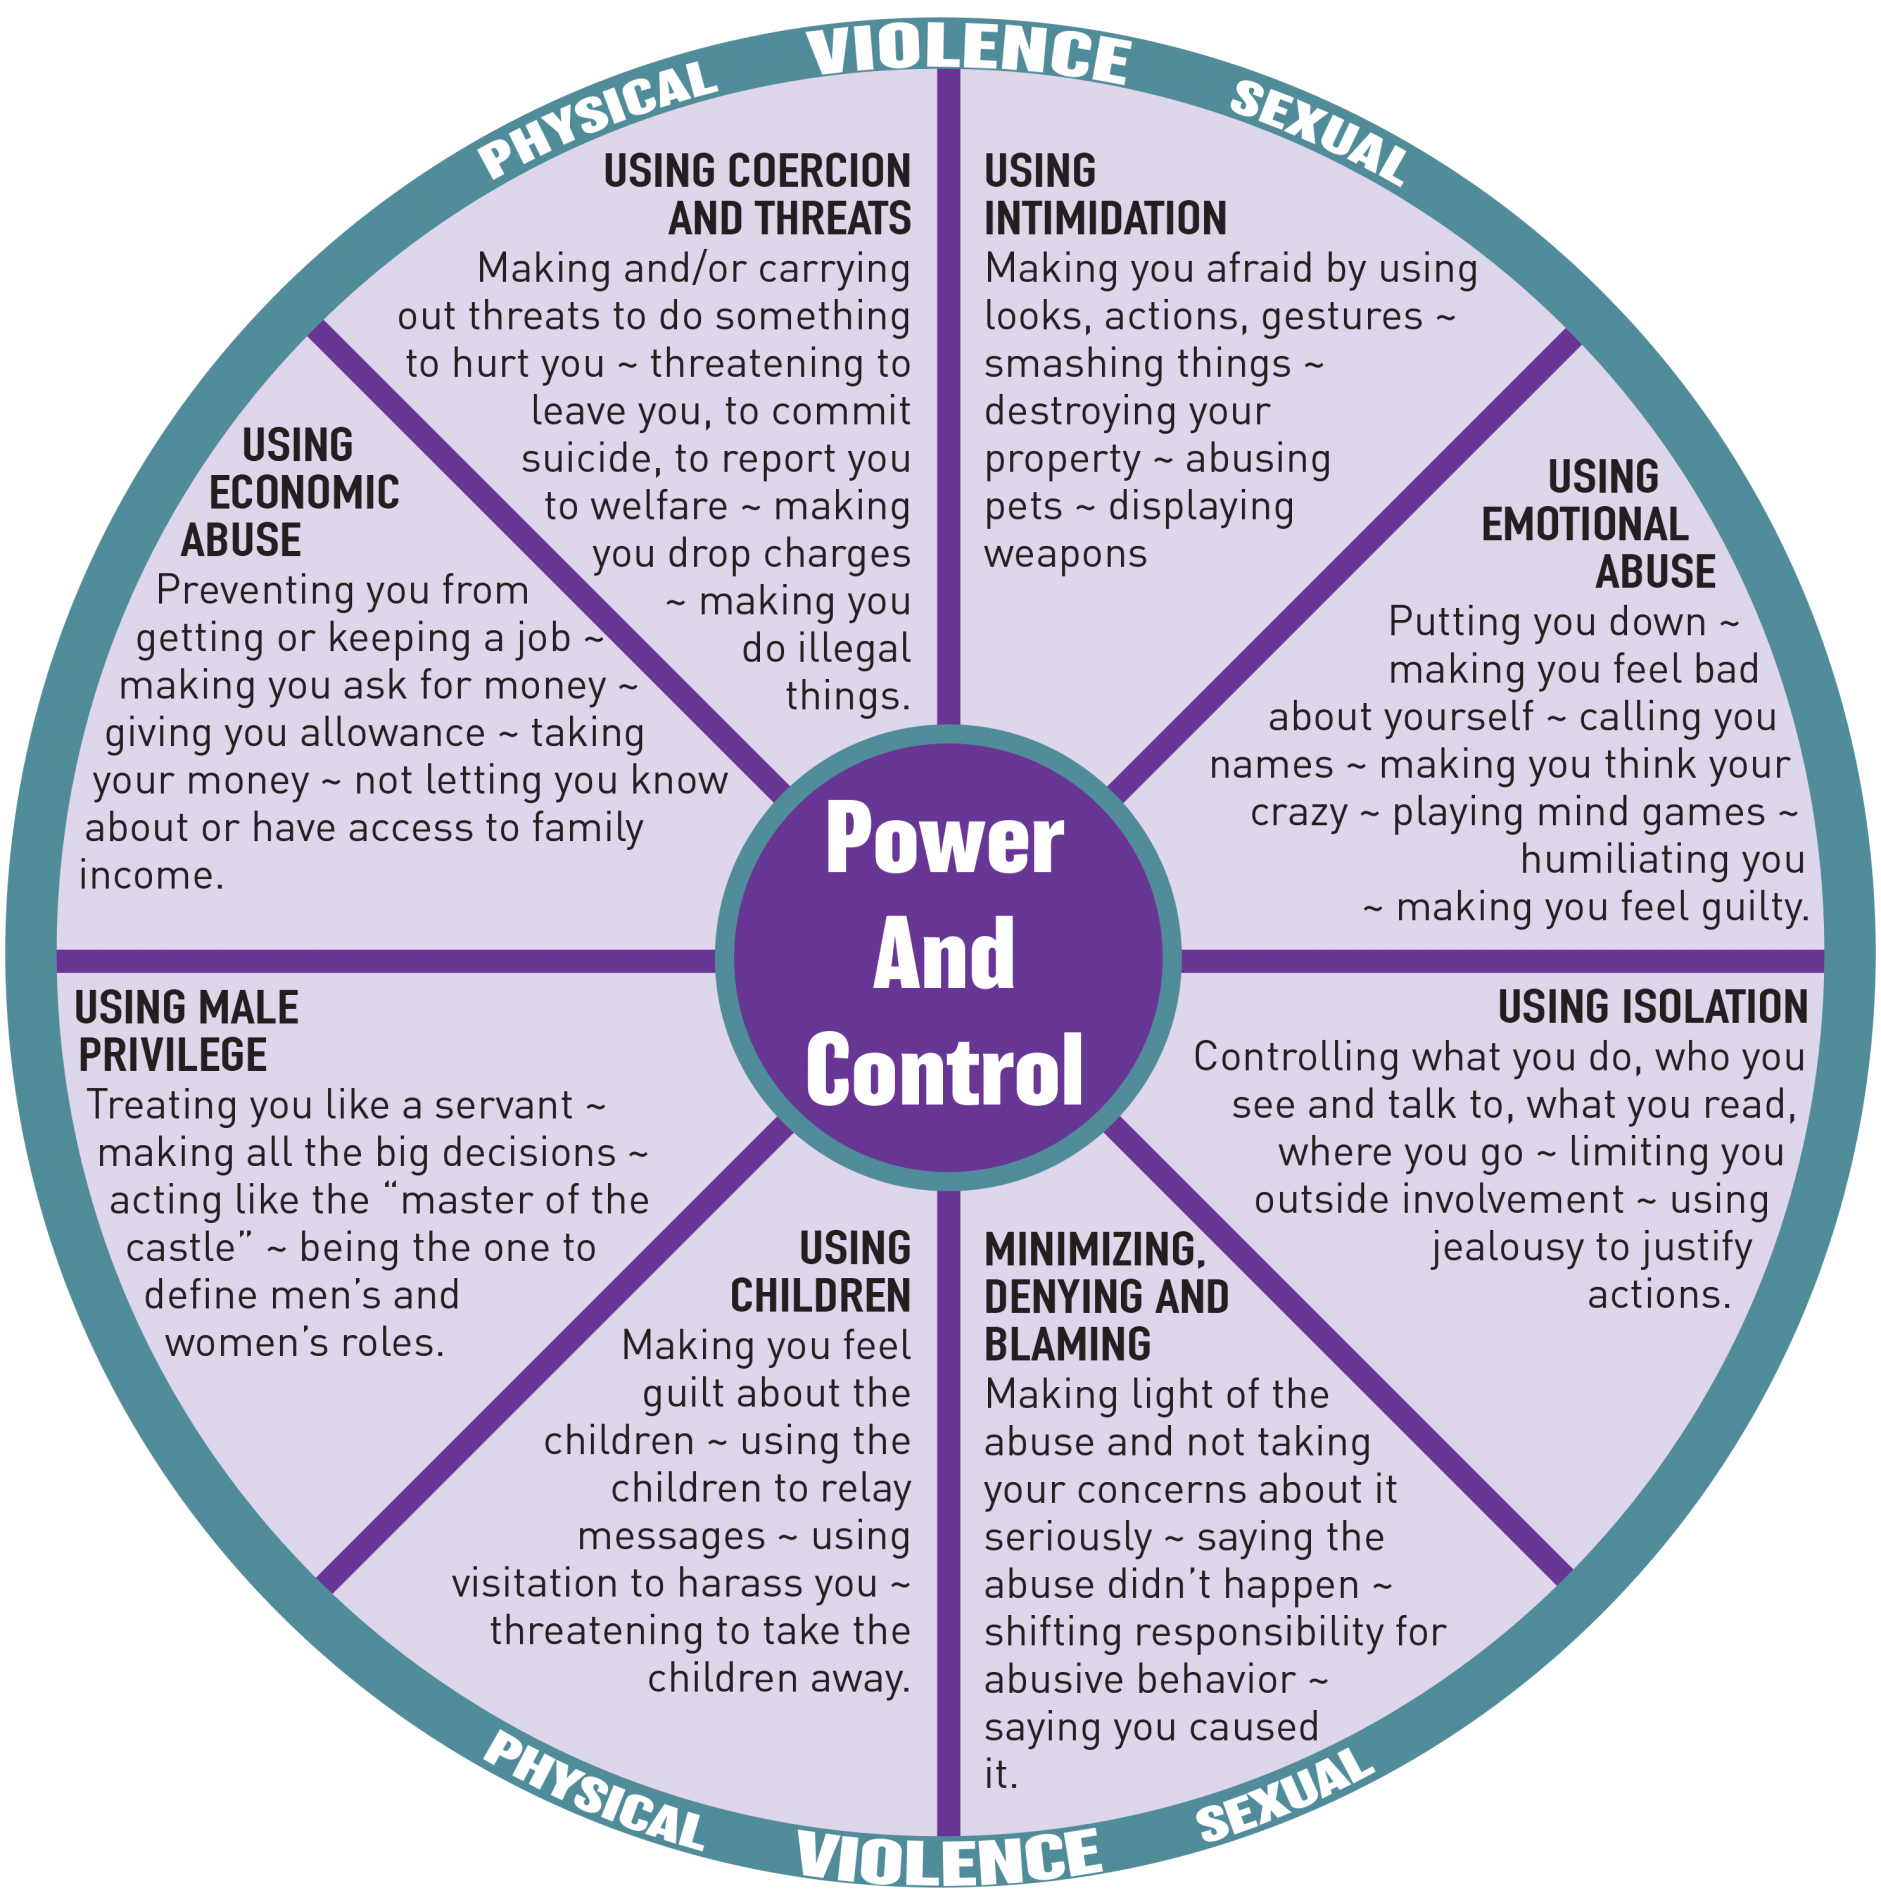 Power and control wheel includes explanations about using coercion and threats, intimidation, emotional abuse, isolation, children, male privilege, and economic abuse as well as minimizing, denying, and blaming victims of abuse.